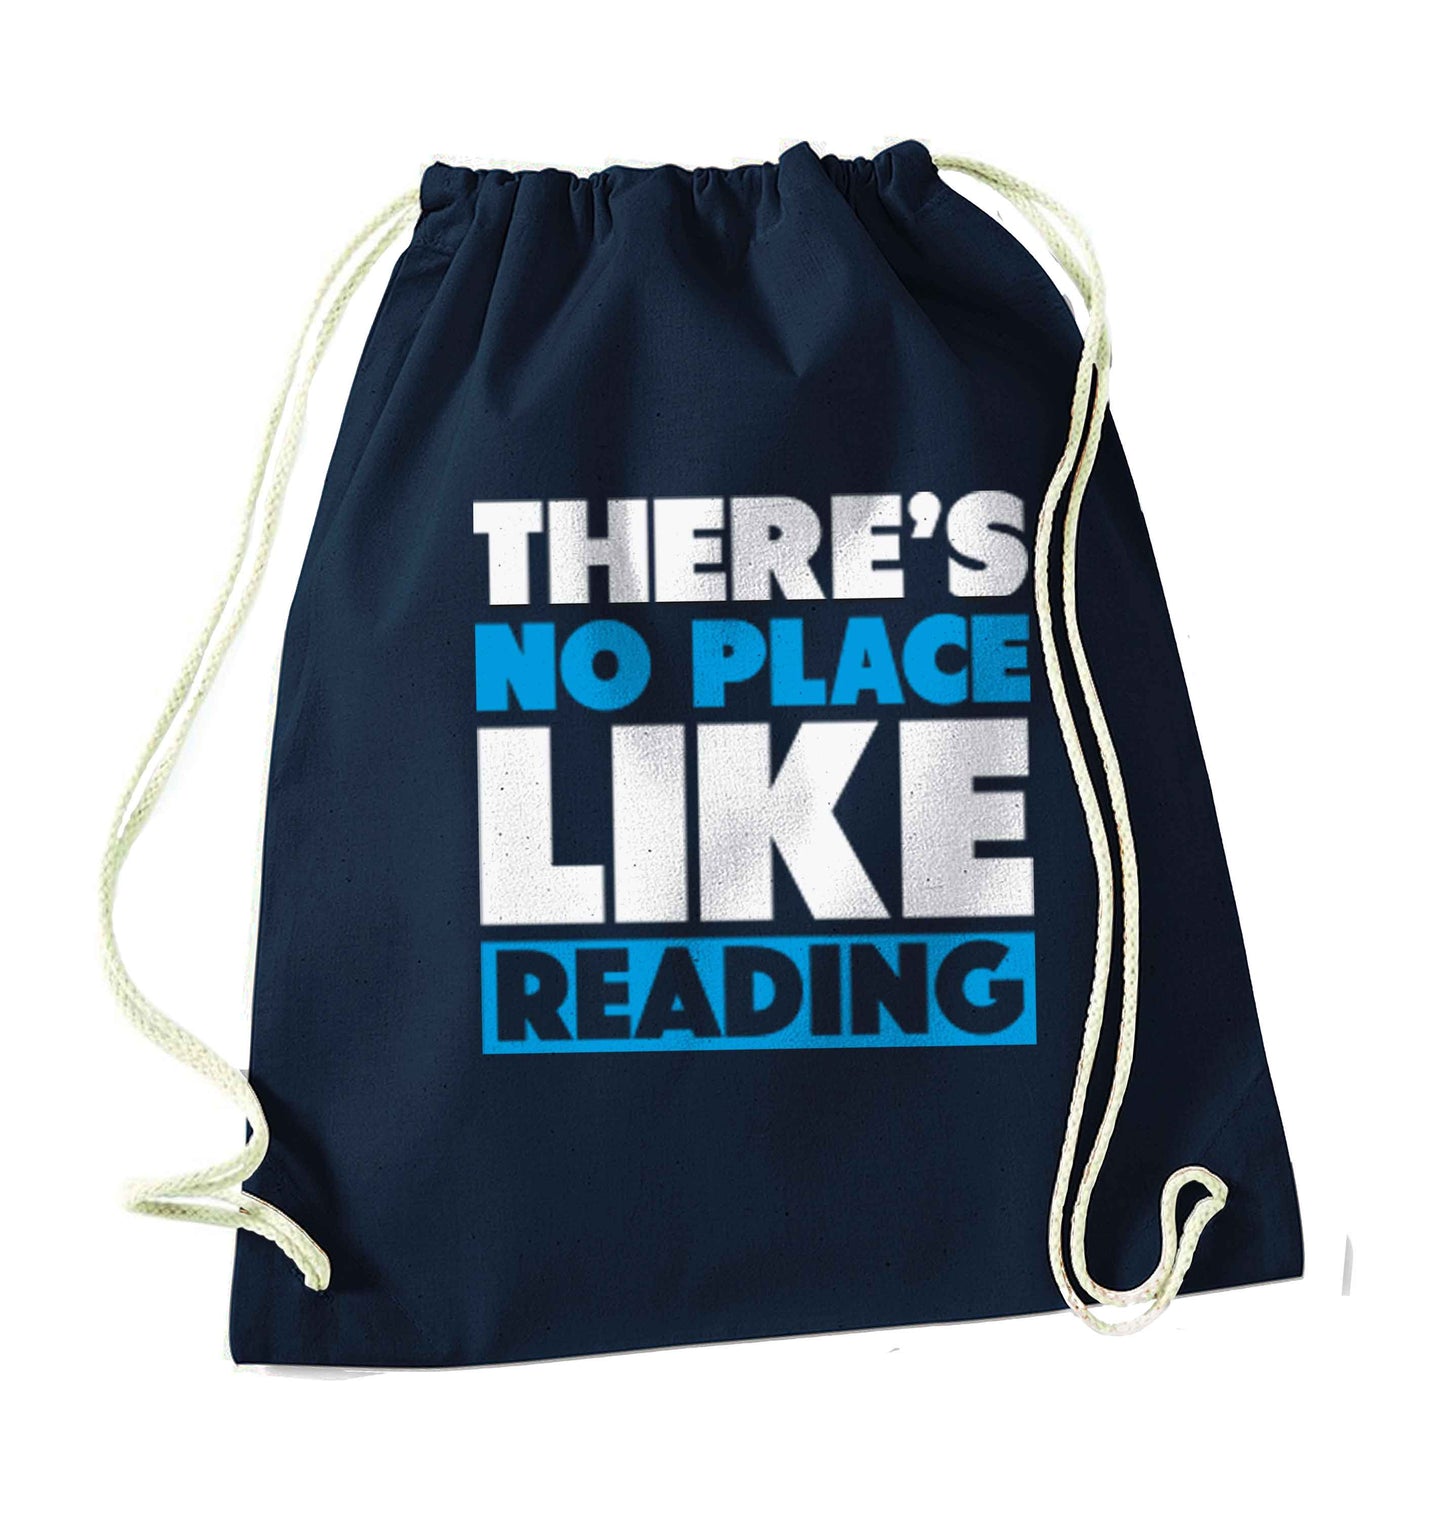 There's no place like Readingnavy drawstring bag